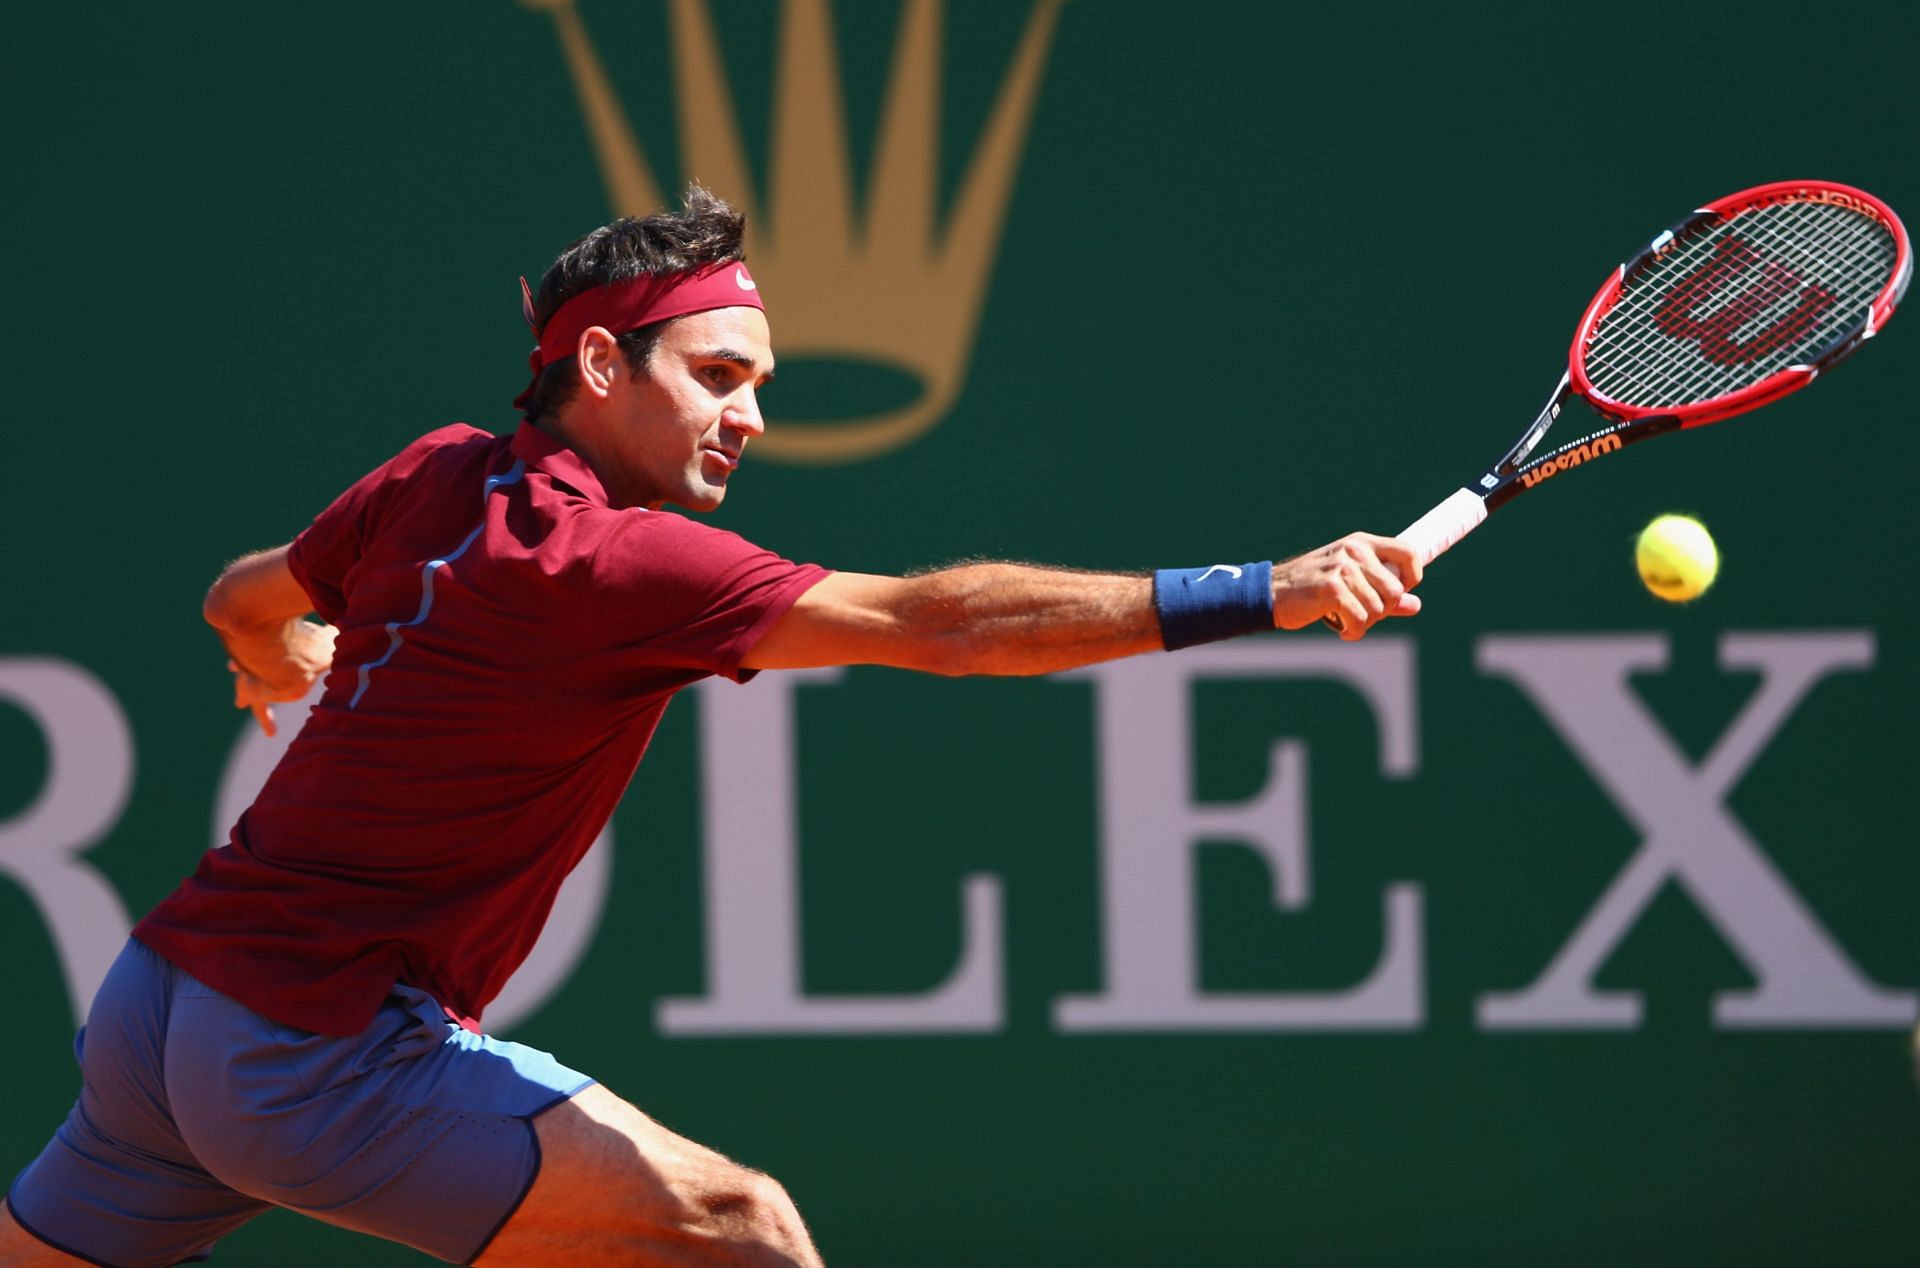 Roger Federer in action at the 2016 Monte Carlo Rolex Masters